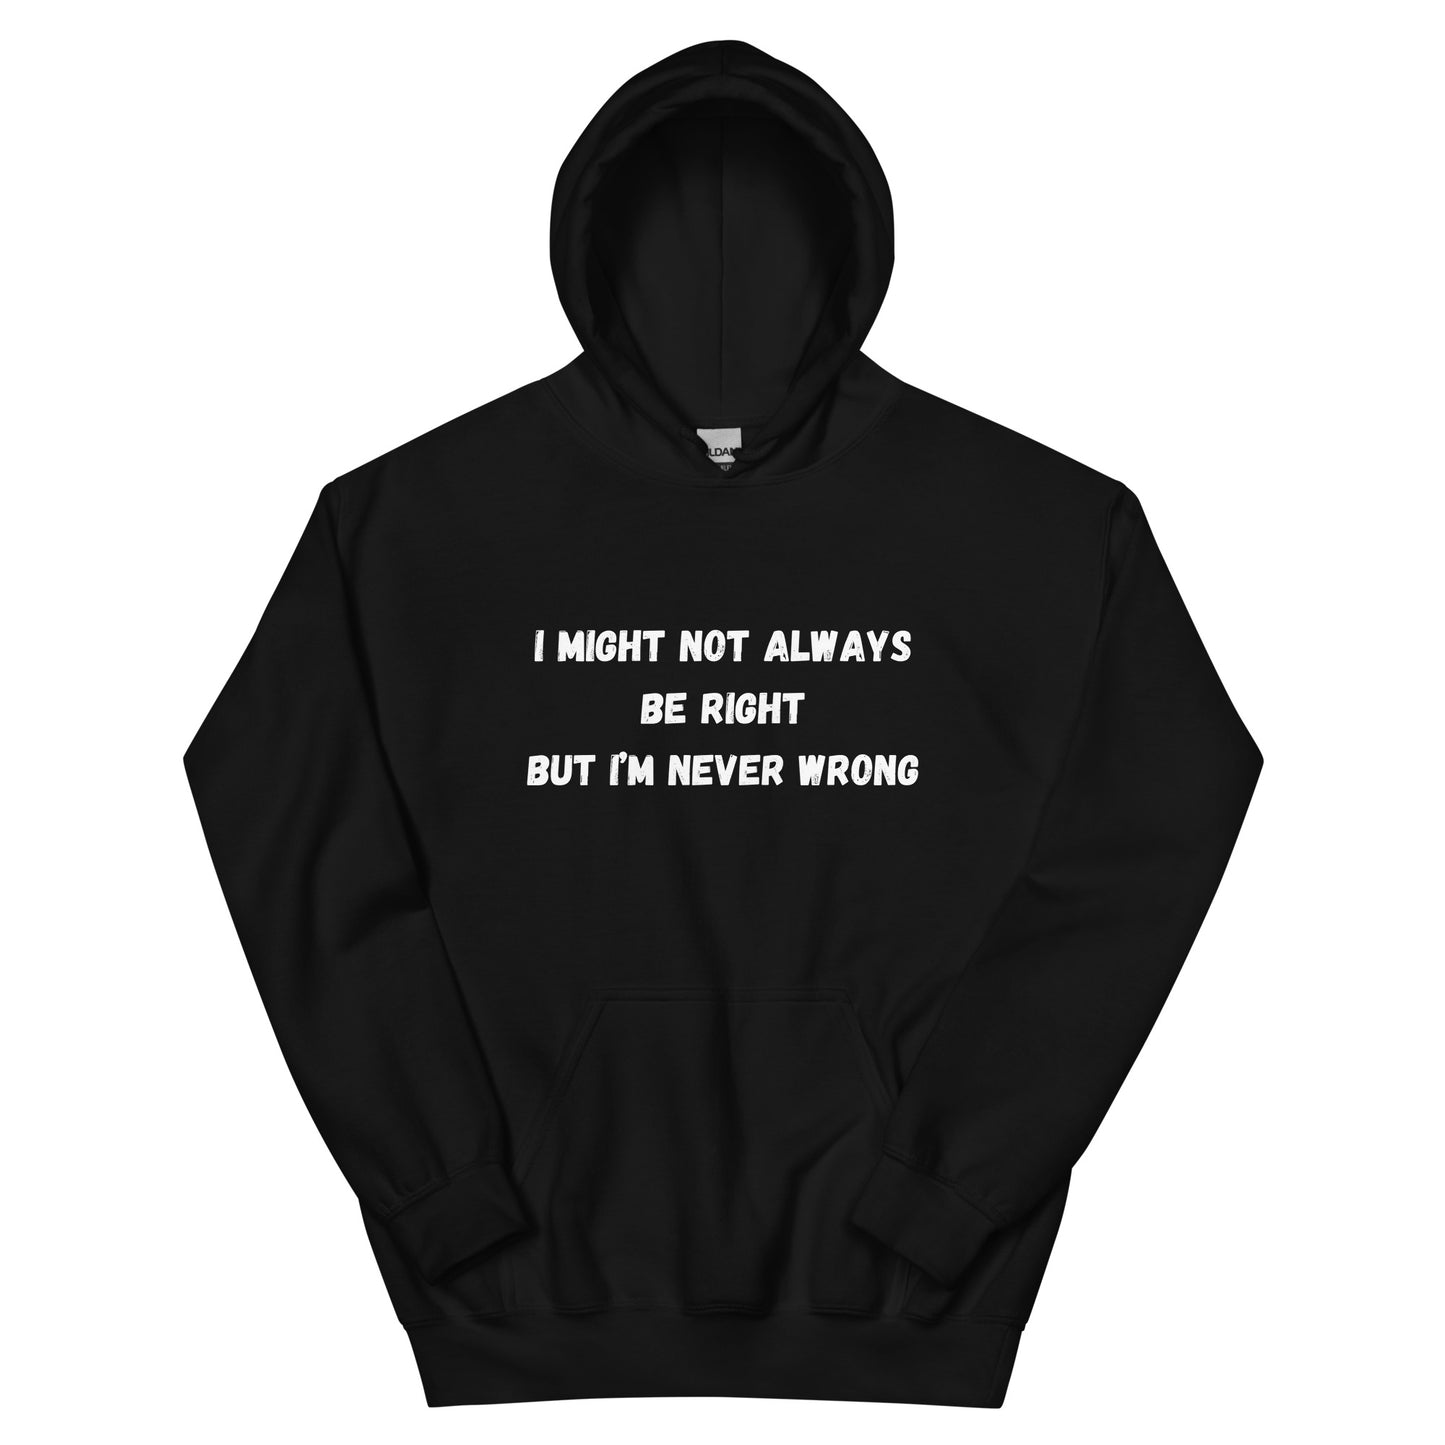 I Might Not Always Be Right (Hoodie)